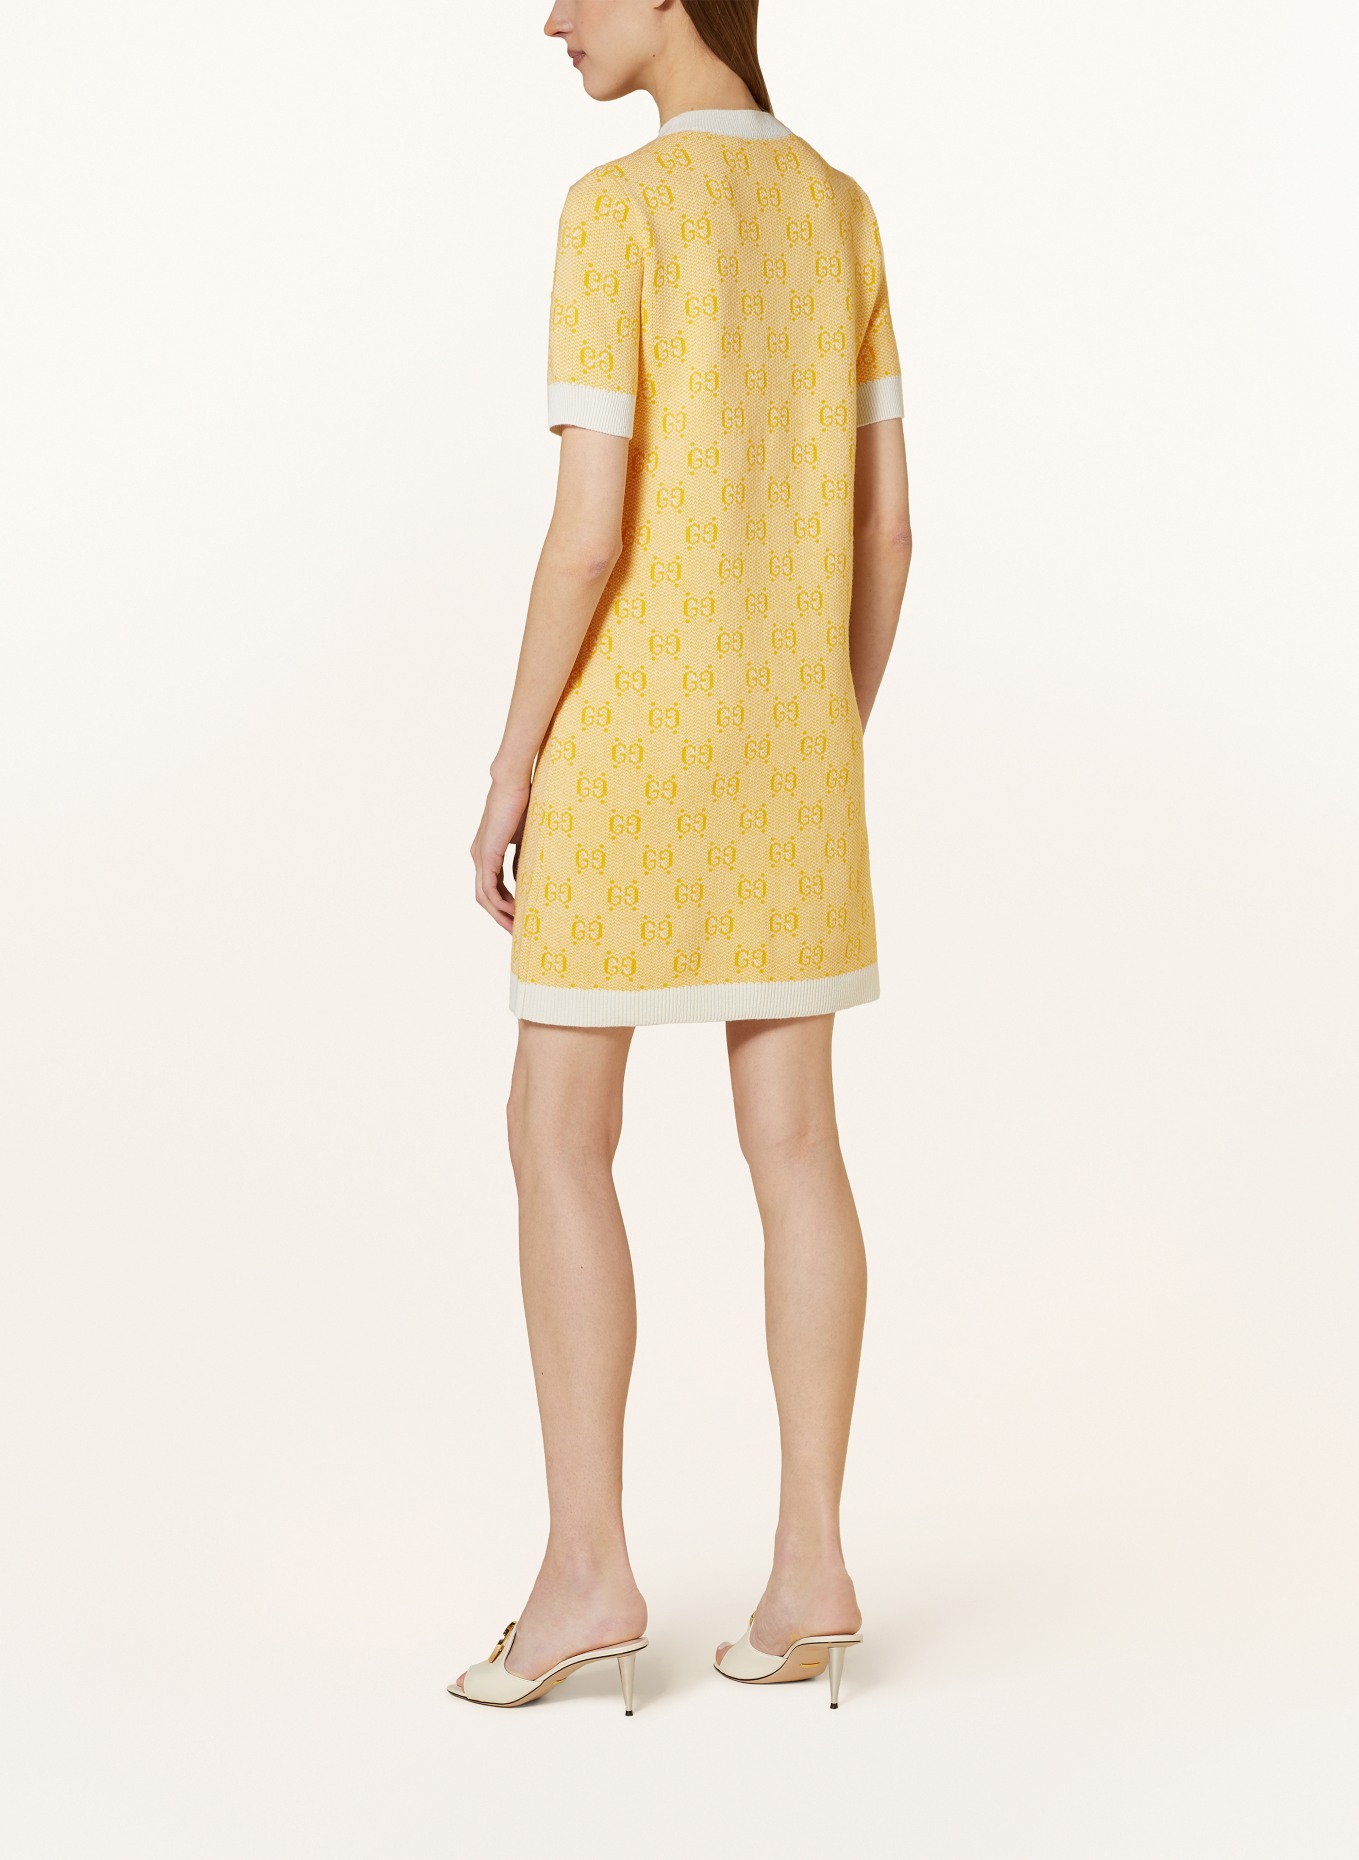 GUCCI Knit dress, Color: YELLOW (Image 3)